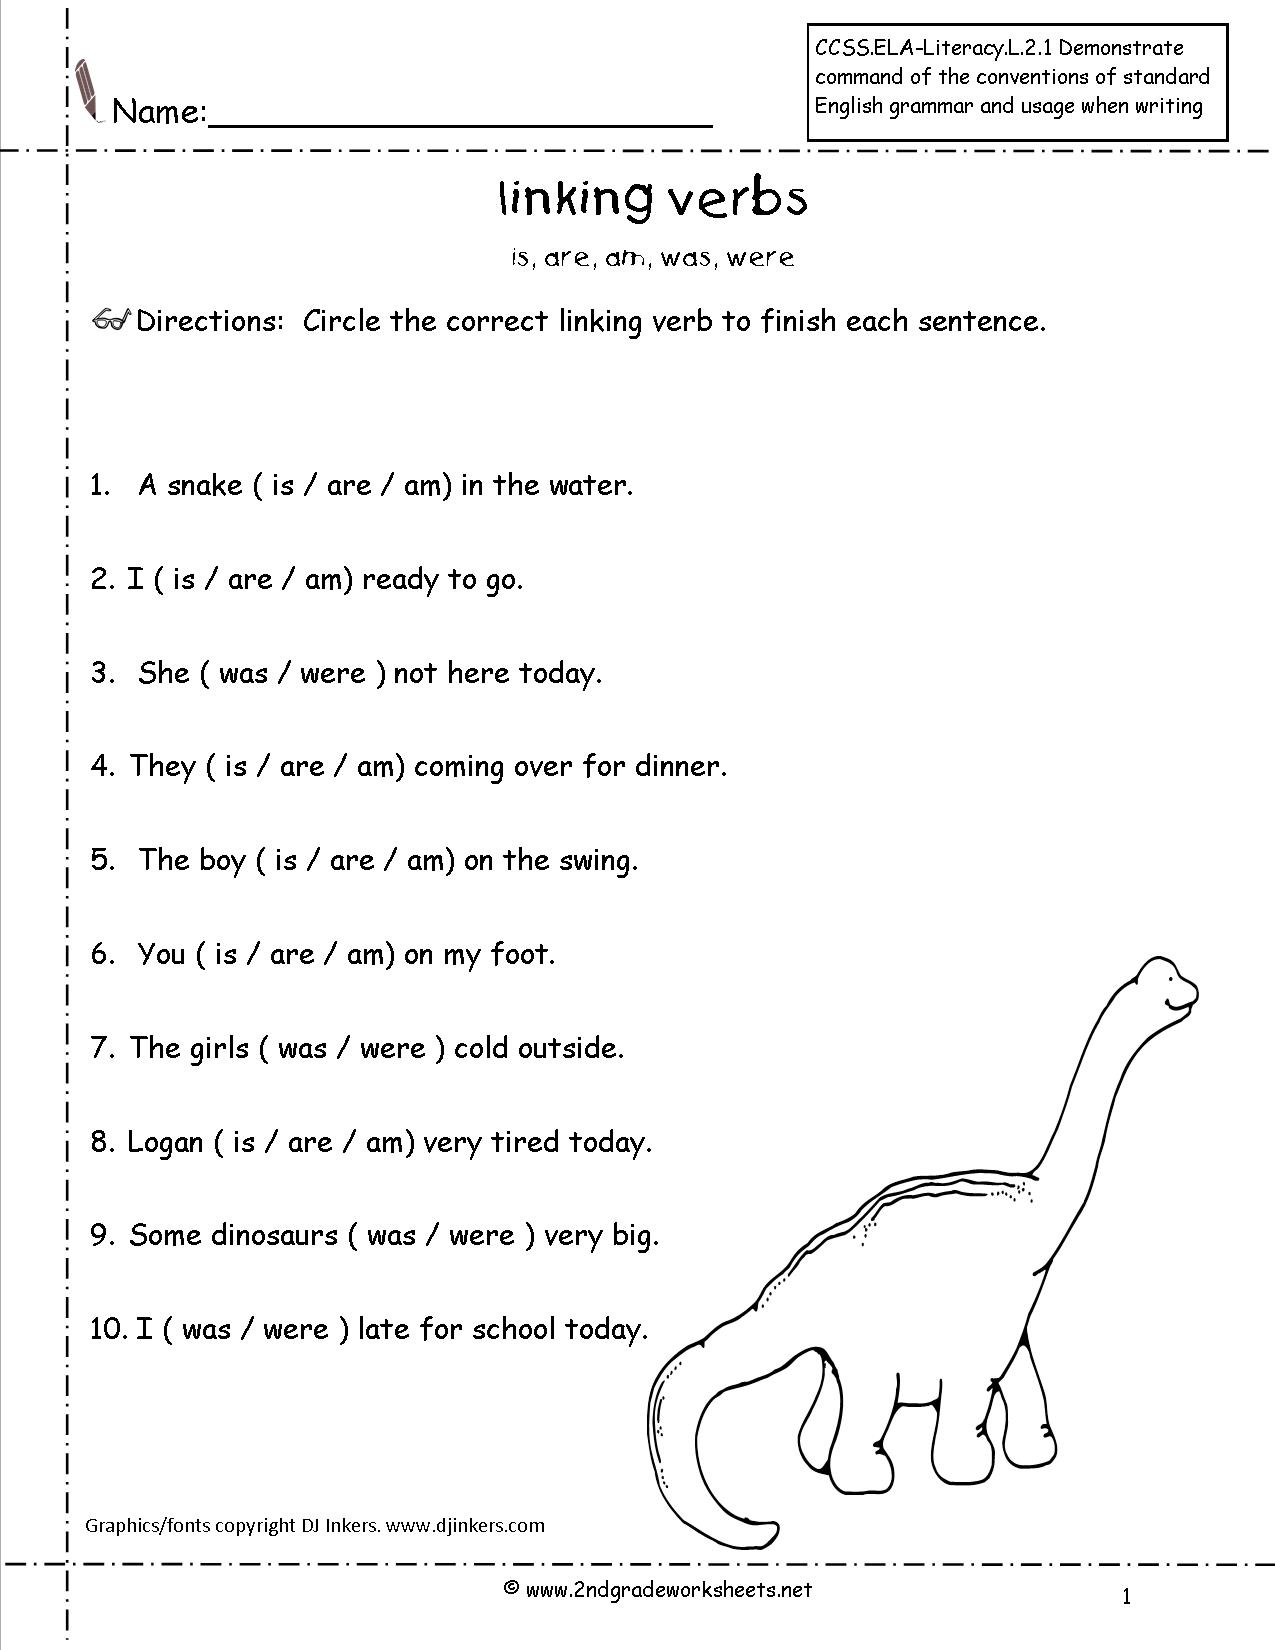 helping-vs-linking-verbs-worksheets-99worksheets-action-helping-linking-verbs-posters-and